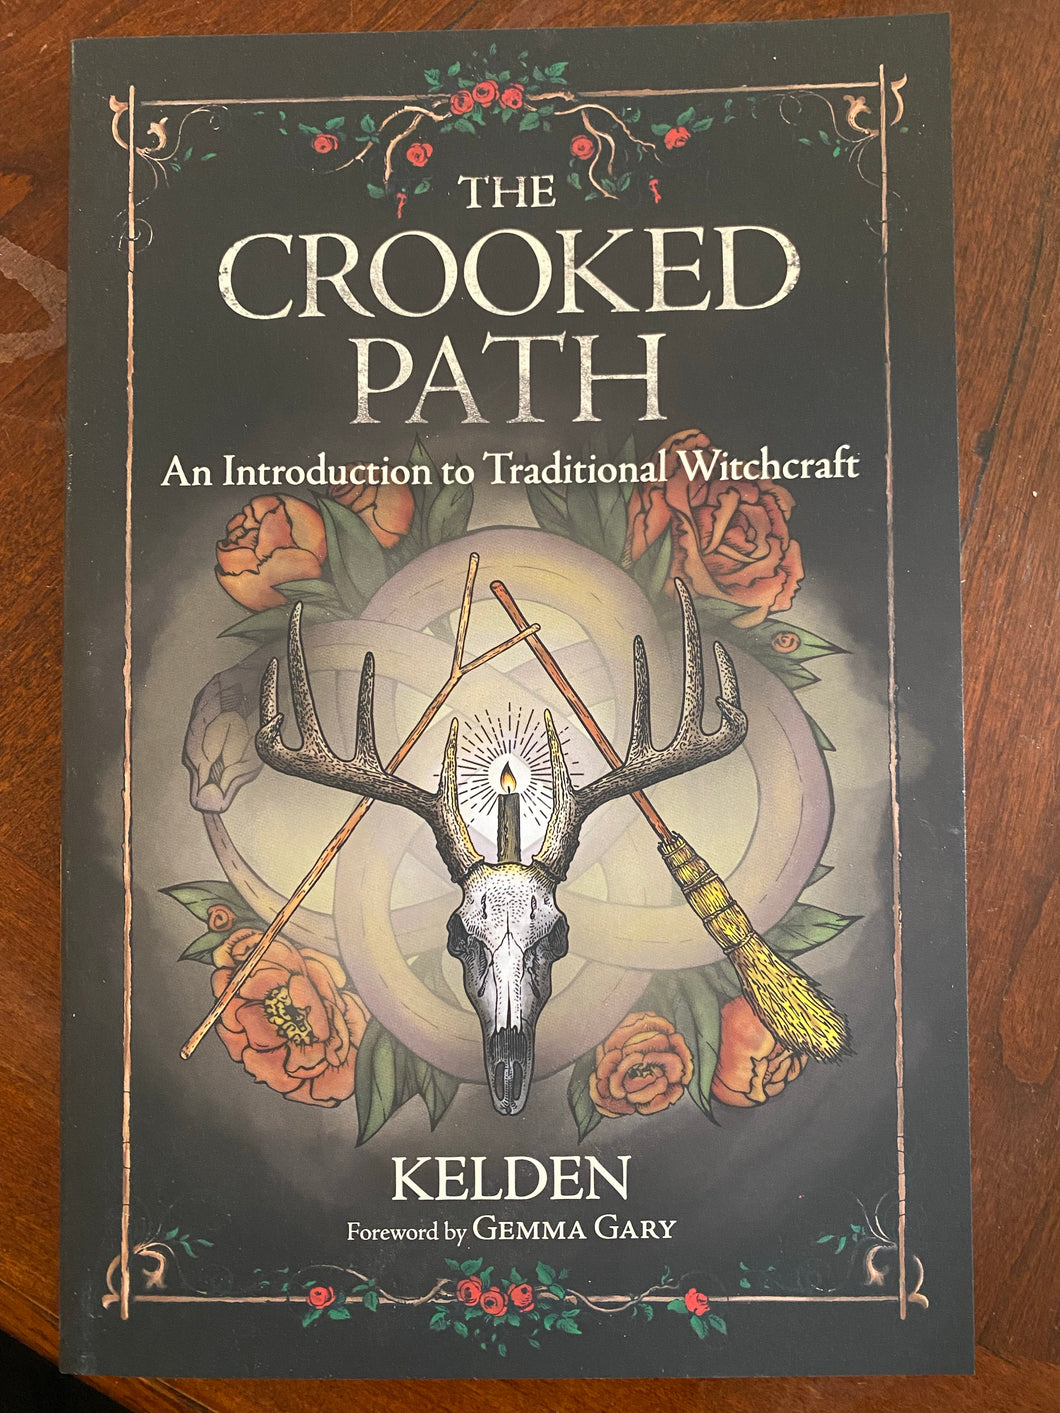 The Crooked Path by Kelden